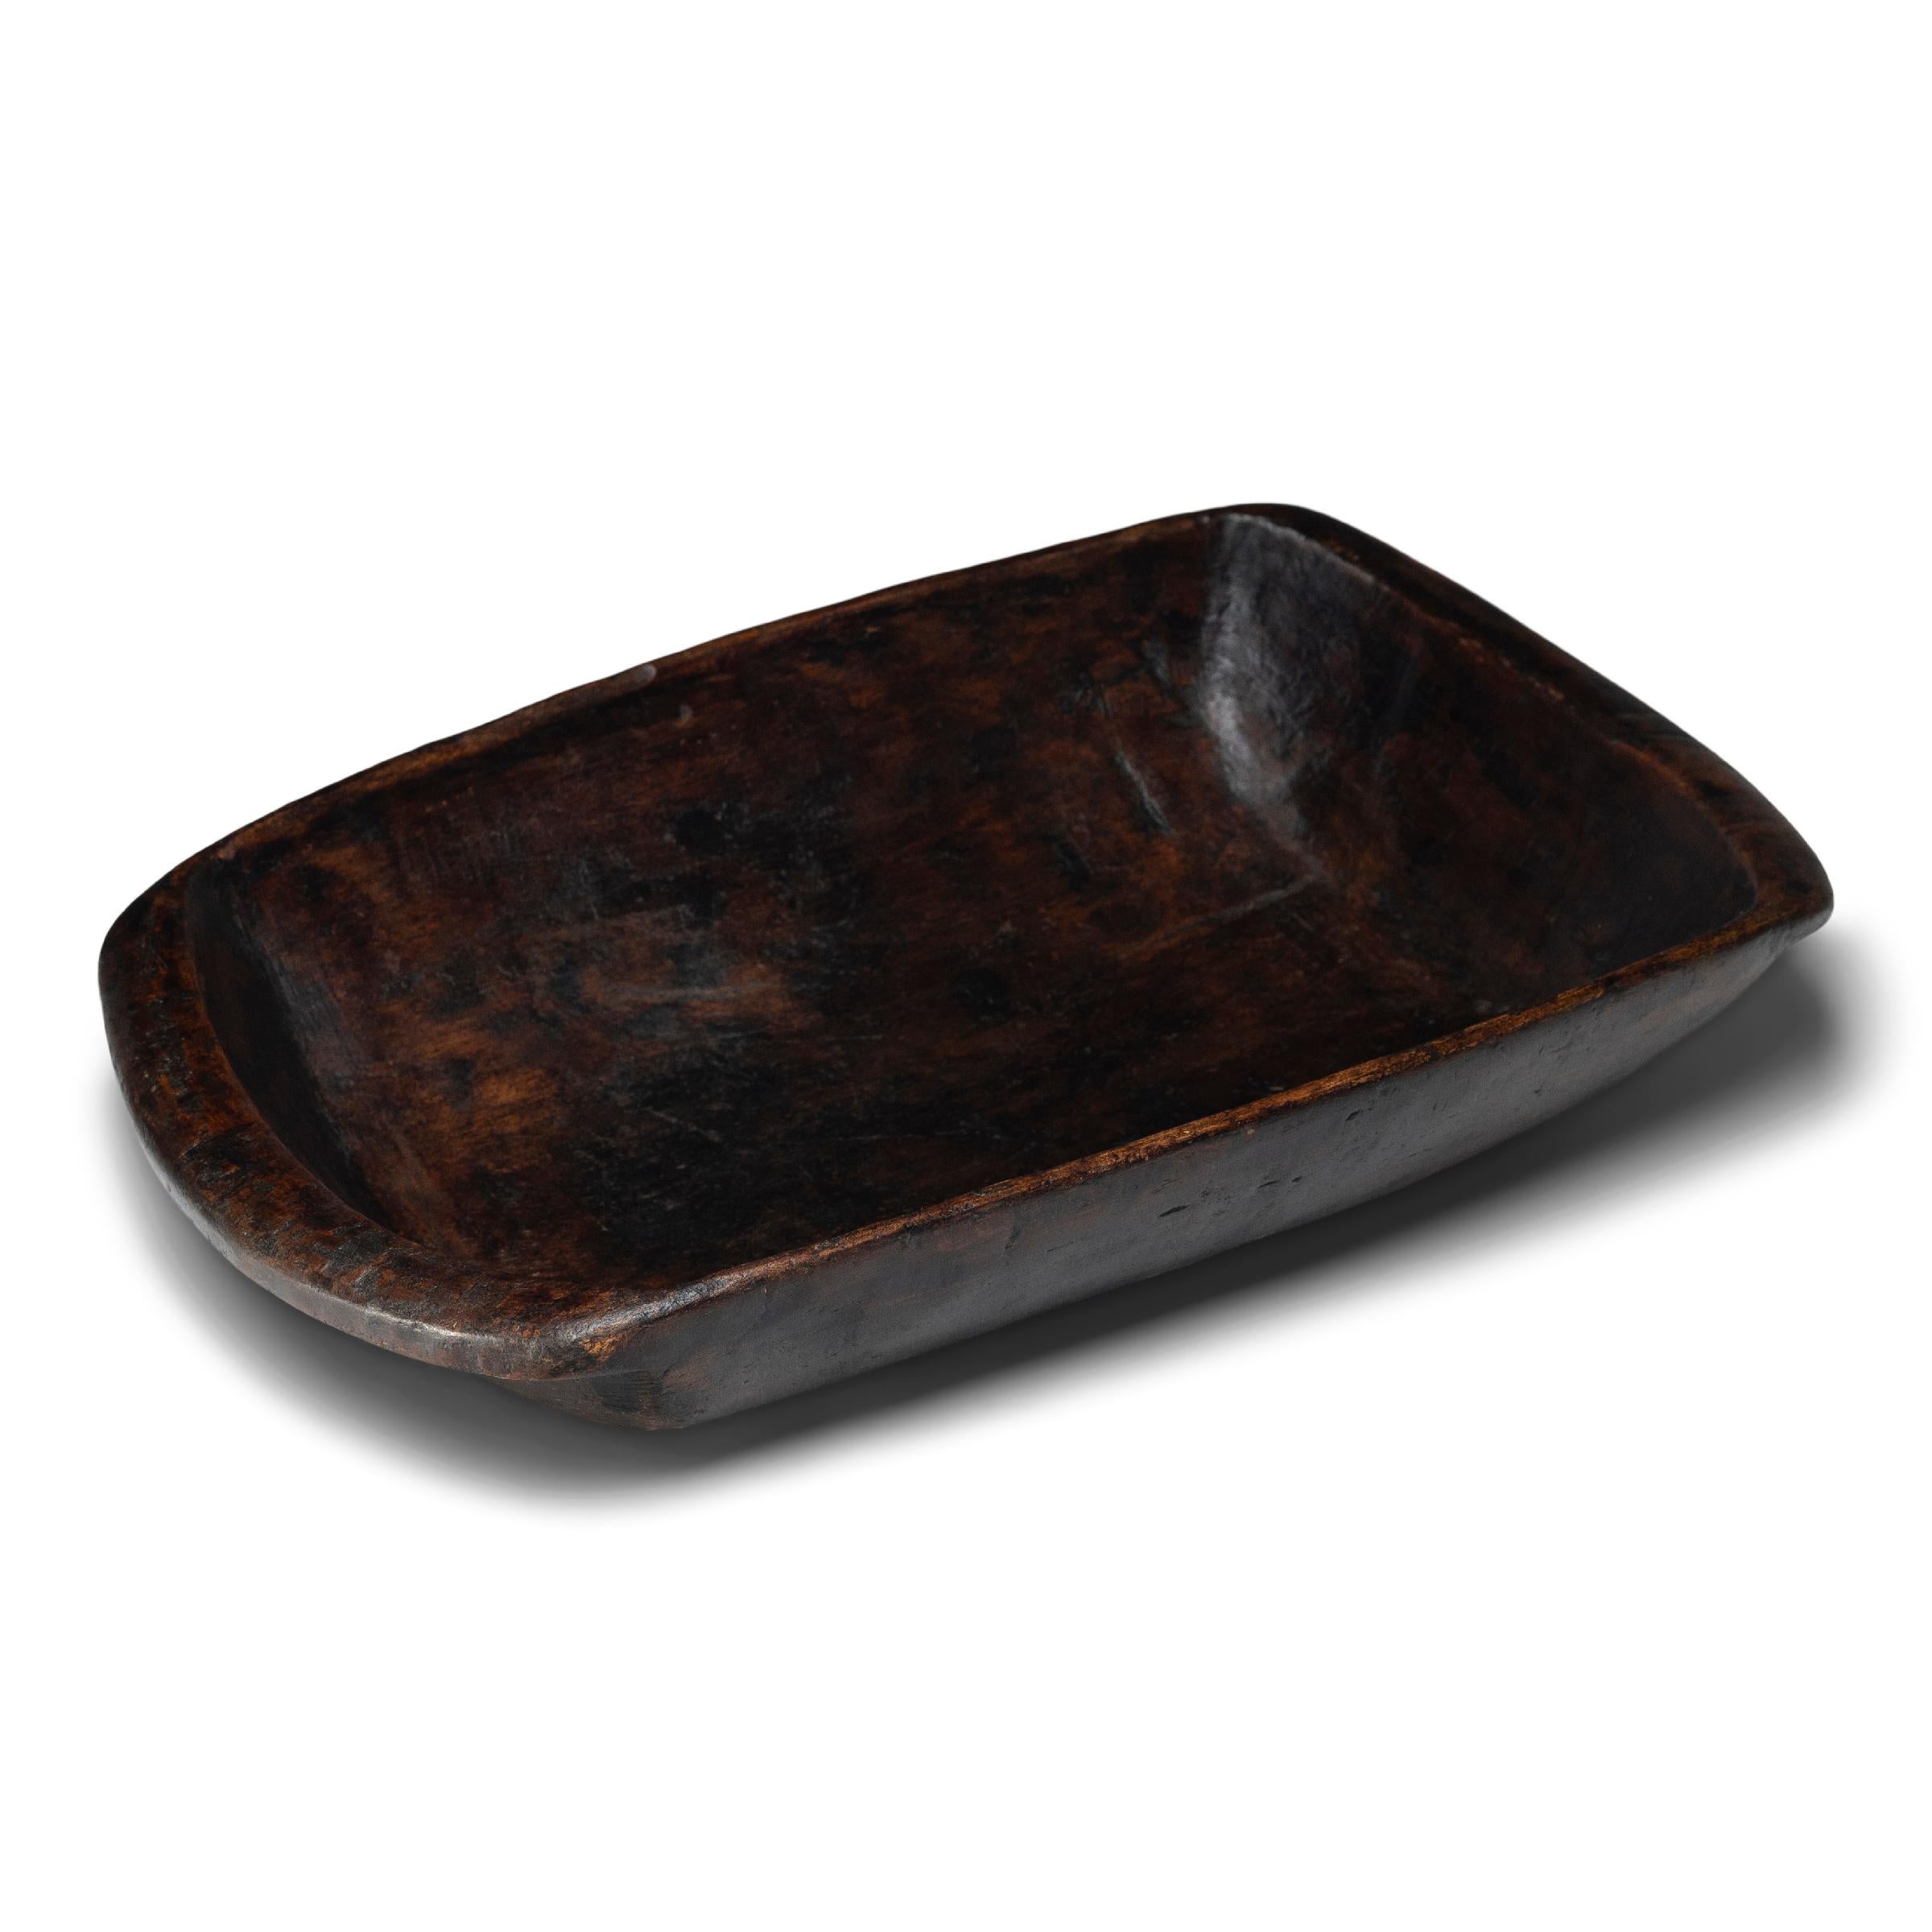 This large wooden farm tray from perfectly balances rustic texture with minimalist simplicity. Carved from a solid block of wood, the tray has a rectangular shape with rounded corners, a deep interior basin and tapered ends that flatten into